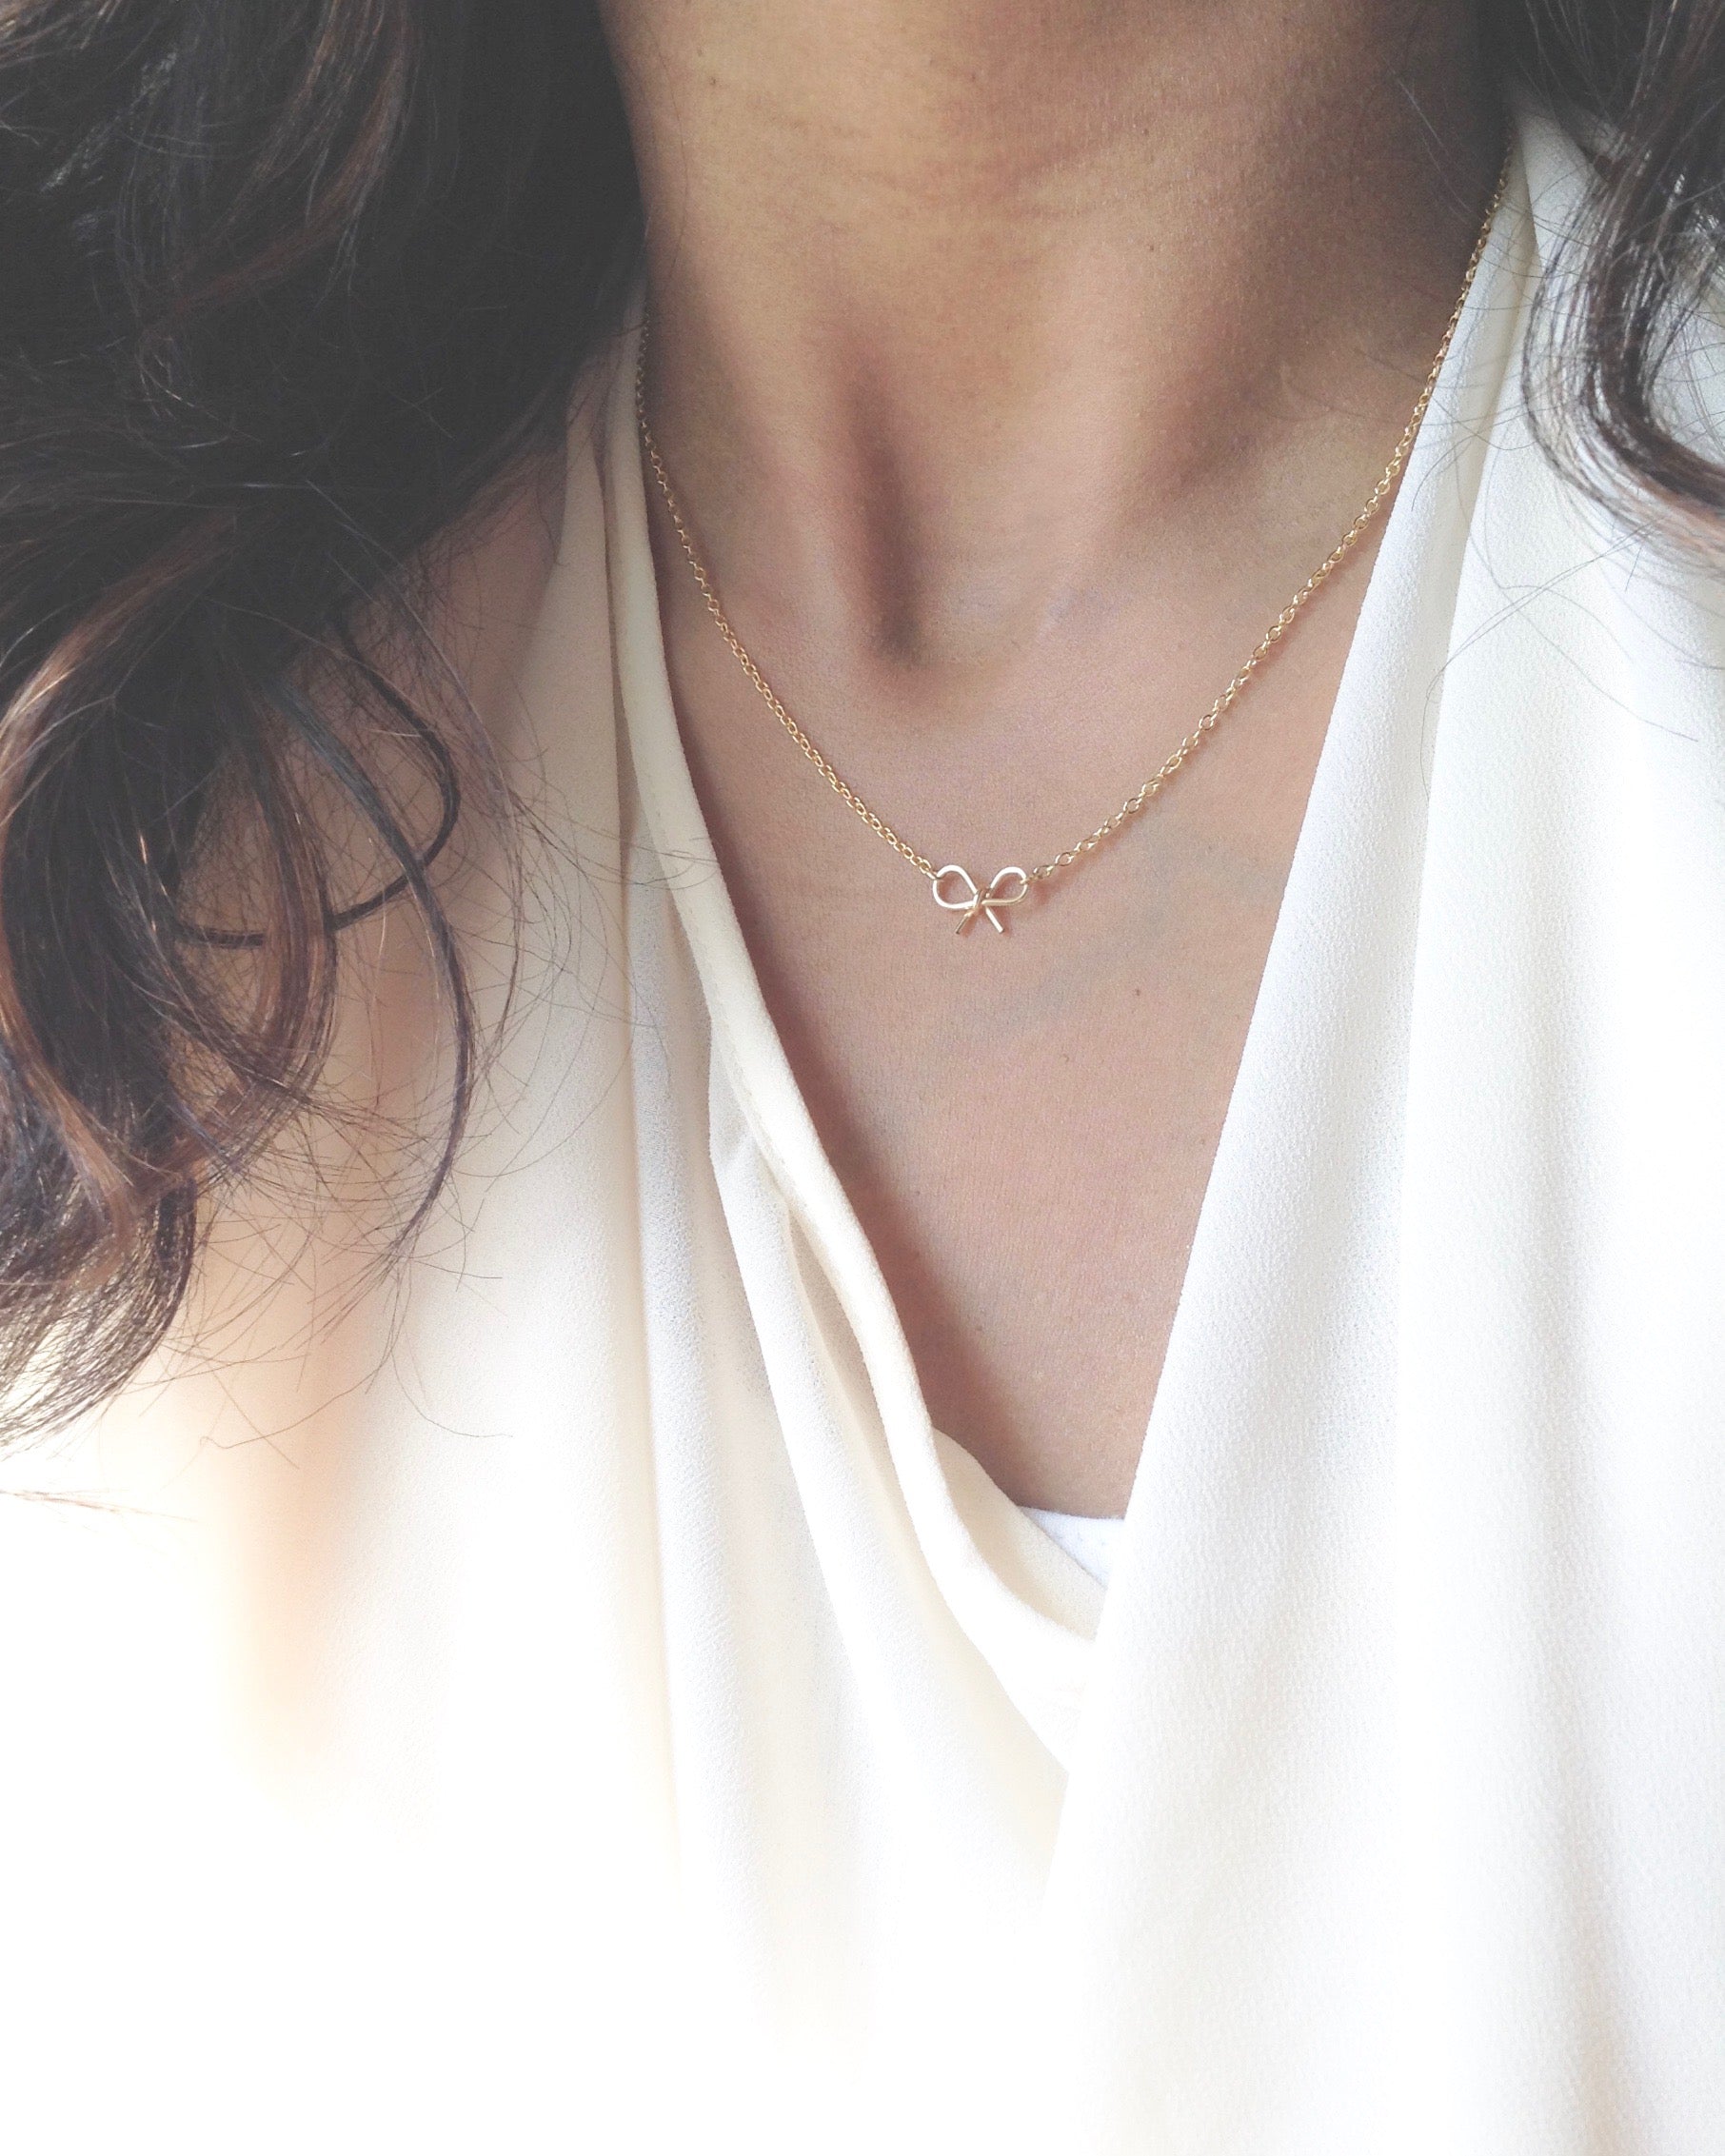 Small Dainty Bow Necklace in Gold Filled or Sterling Silver | IB Jewelry